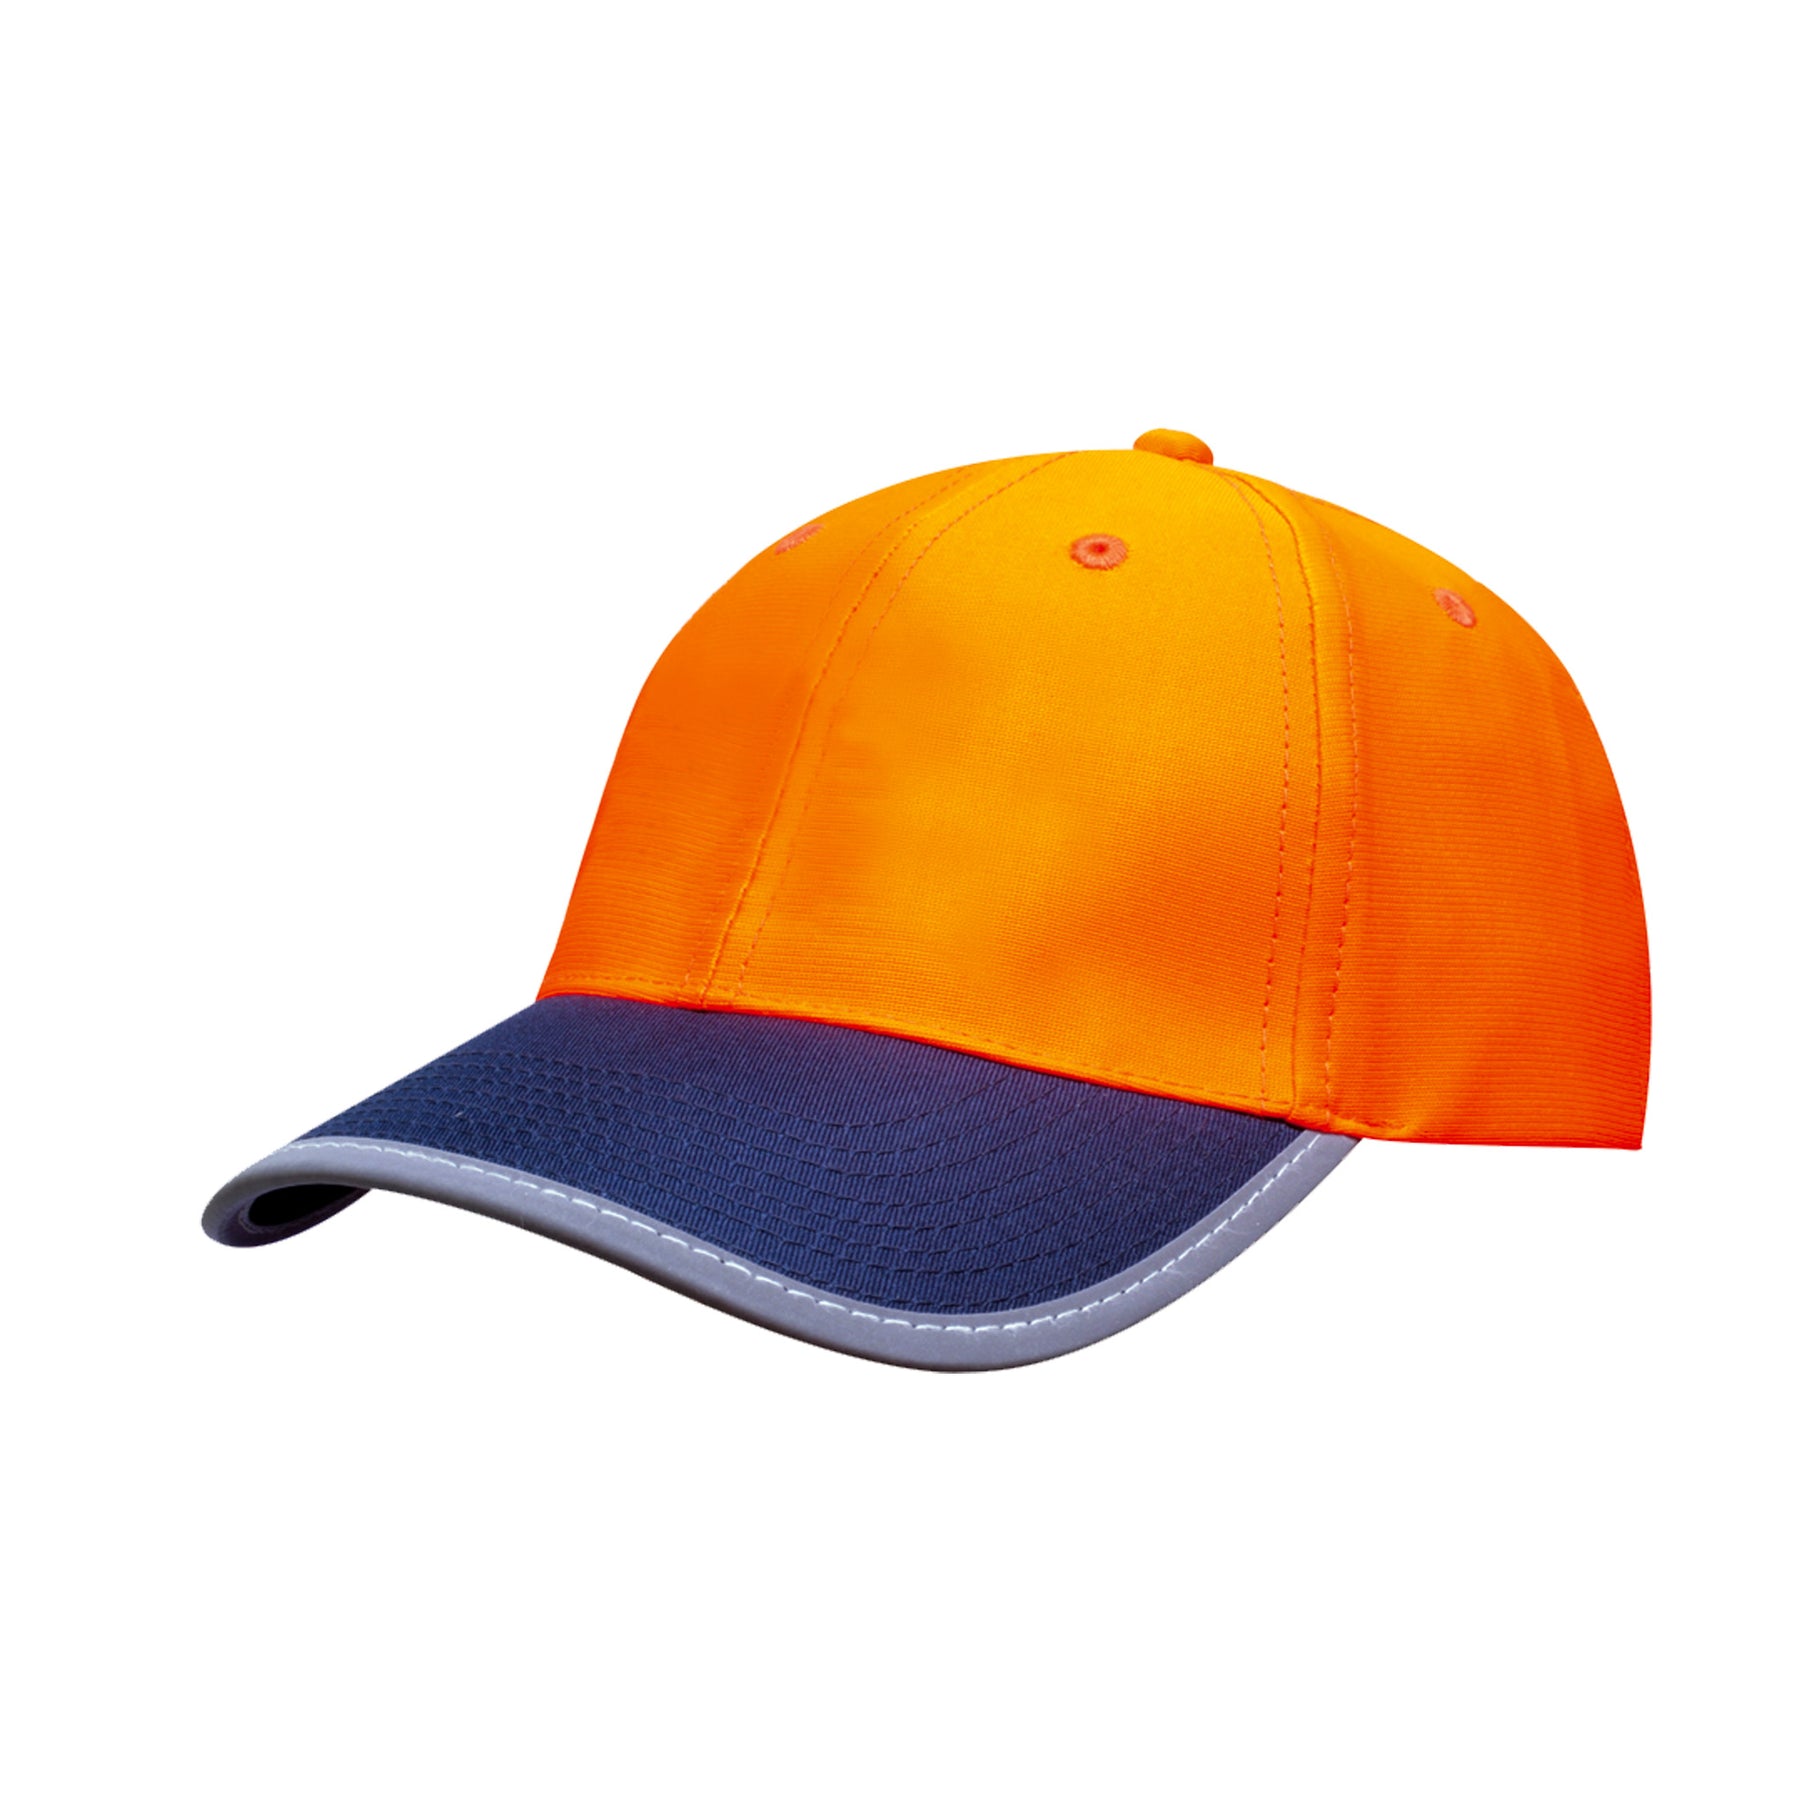 orange navy silver luminescent safety cap with reflective trim